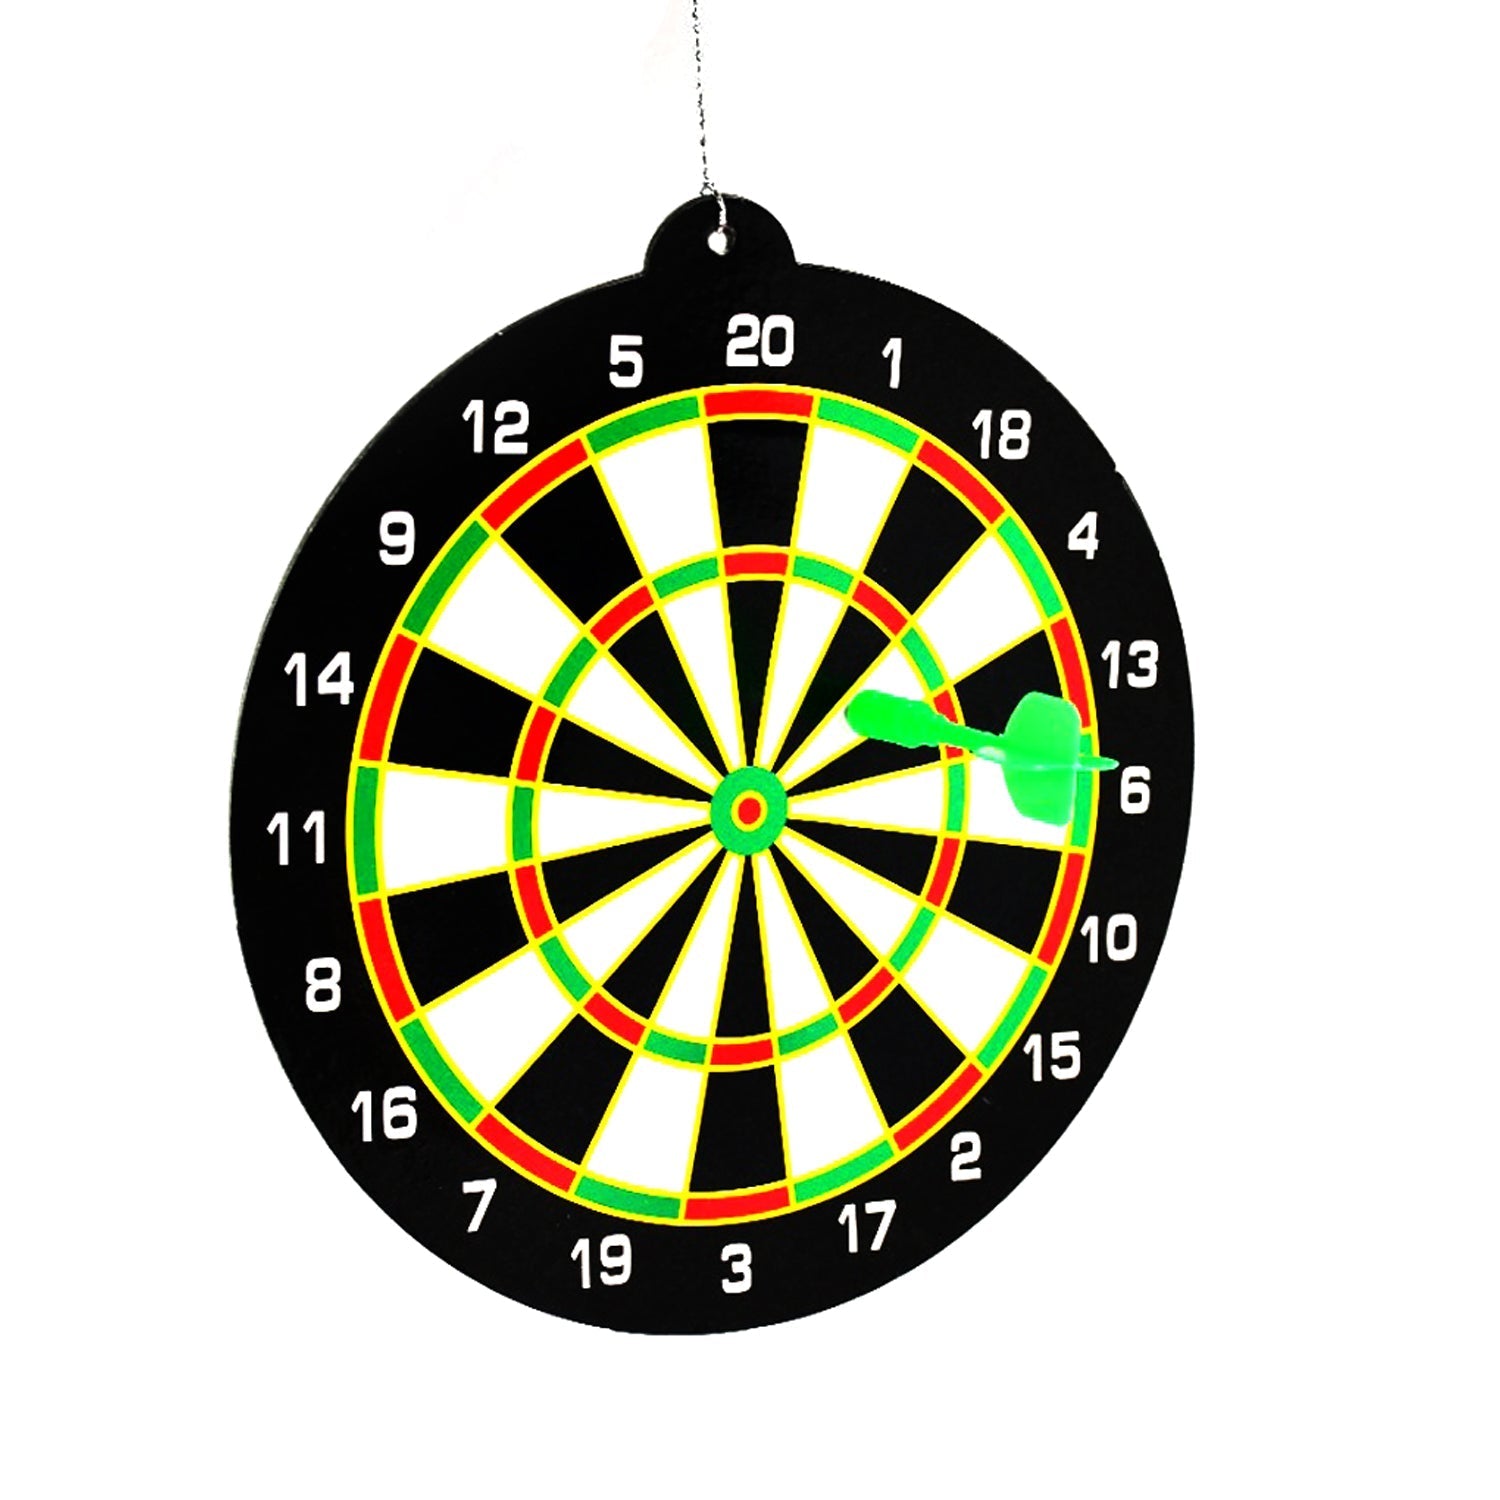 4895 Small Magnetic Dartboard Set - Dart Board with Magnet Darts for Kids and Adults, Gift for Game Room, Office, Man Cave and Home. DeoDap